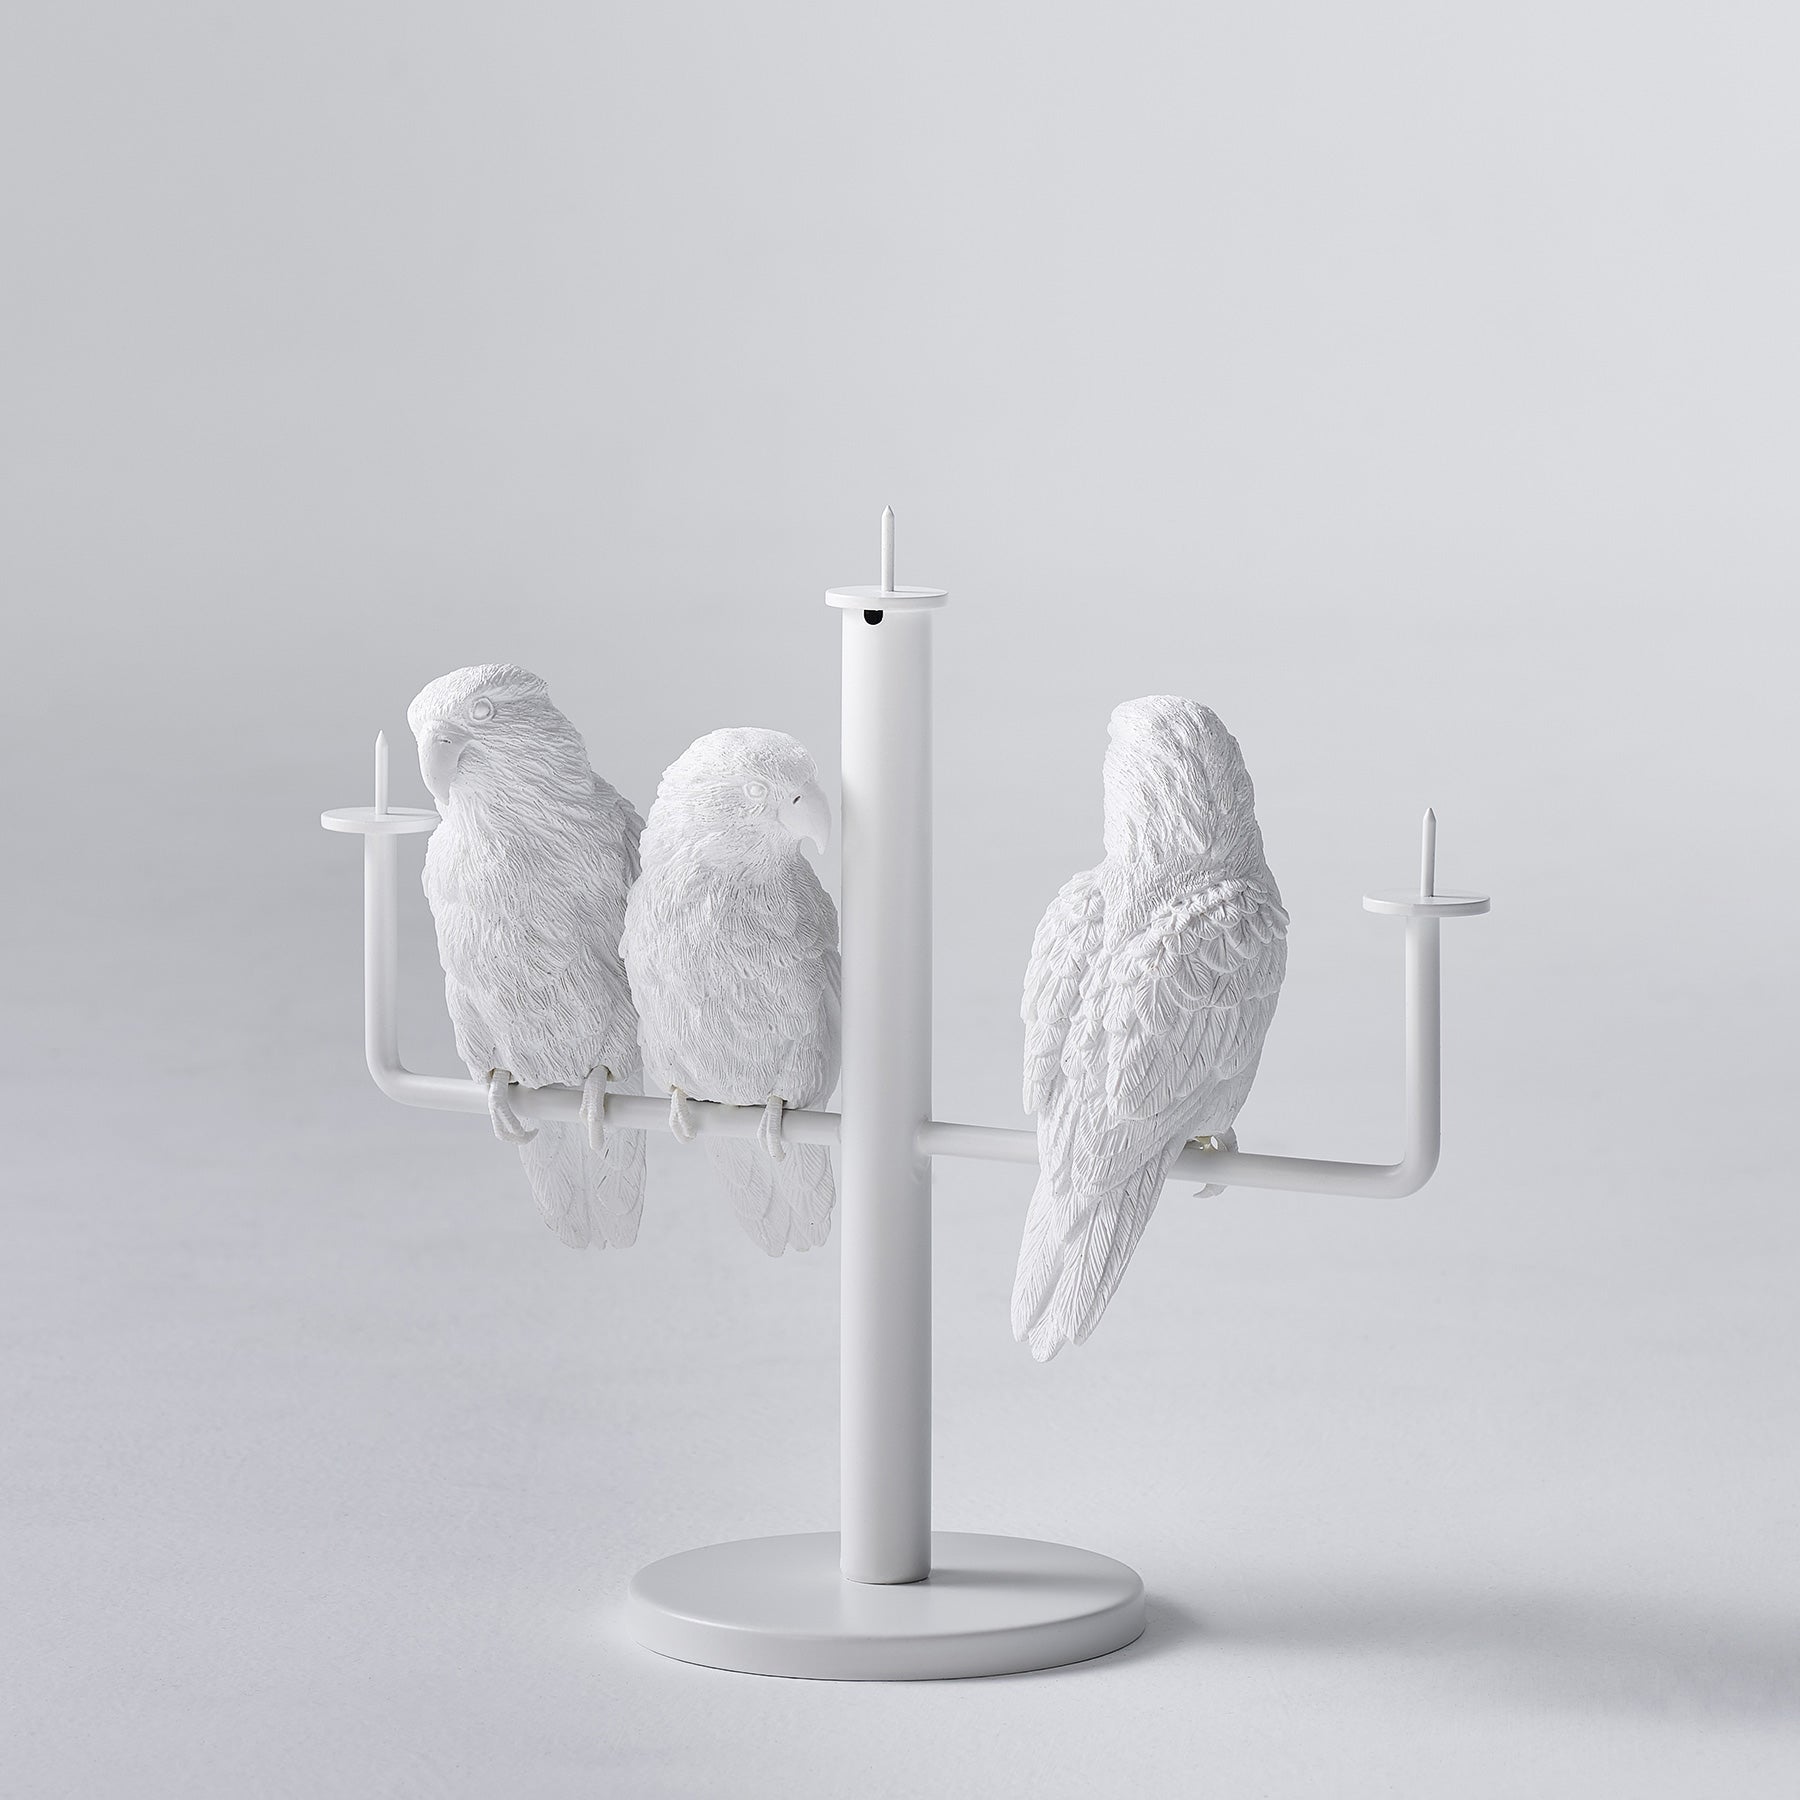 Three parrots create ambiance and good mood as candleholders